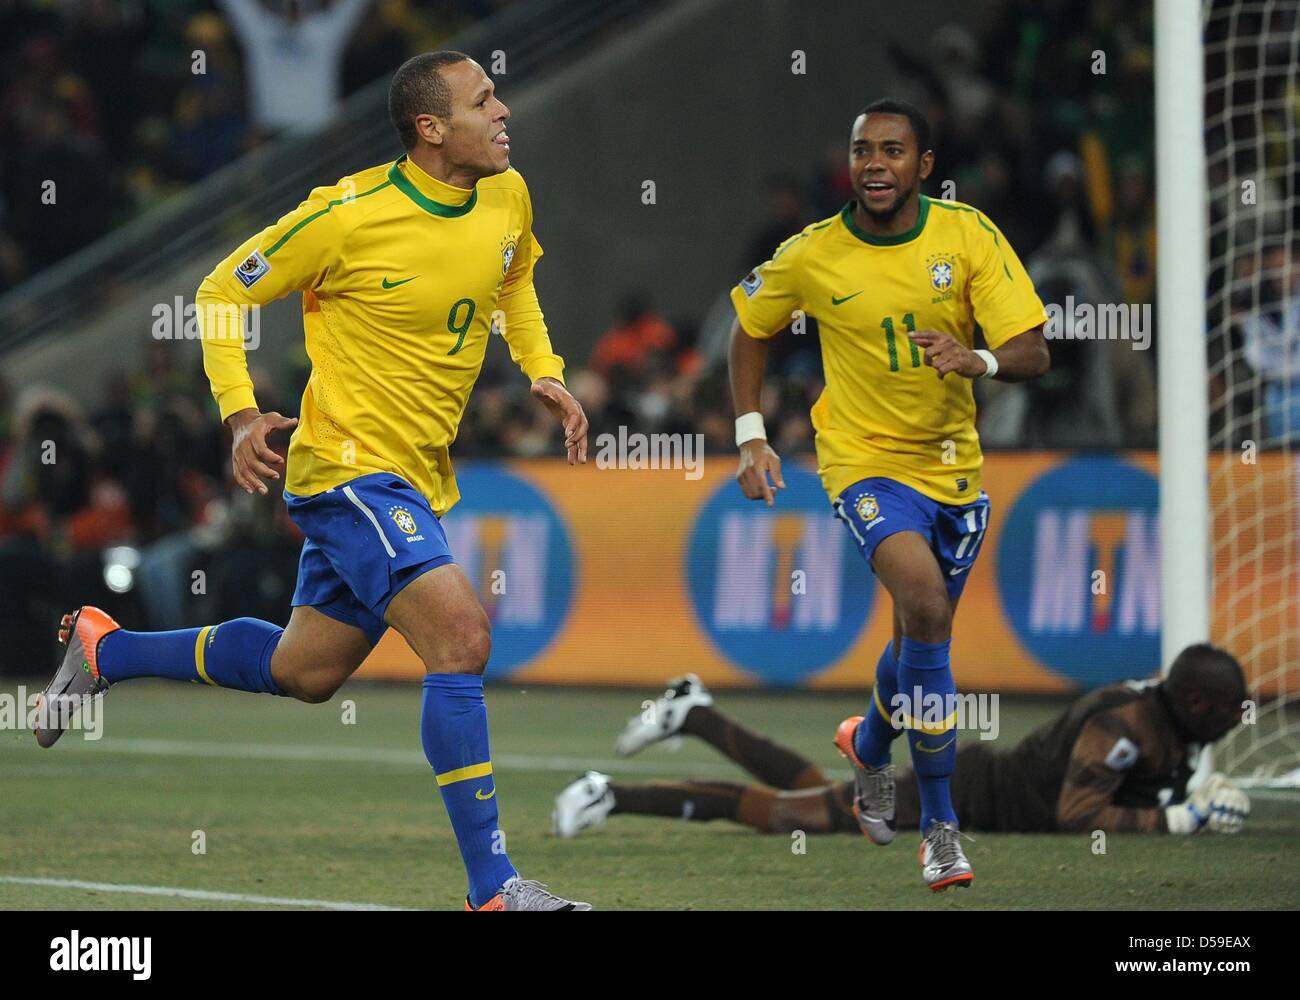 Brazil's Luis Fabiano (L) celebrates scoring with team mate Robinho as Ivory Coast's goalkeeper Boubacar Barry lies beaten on the ground during the 2010 FIFA World Cup group G match between Brazil and Ivory Coast at Soccer City Stadium in Johannesburg, South Africa 20 June 2010. Photo: Achim Scheidemann dpa - Please refer to http://dpaq.de/FIFA-WM2010-TC Stock Photo